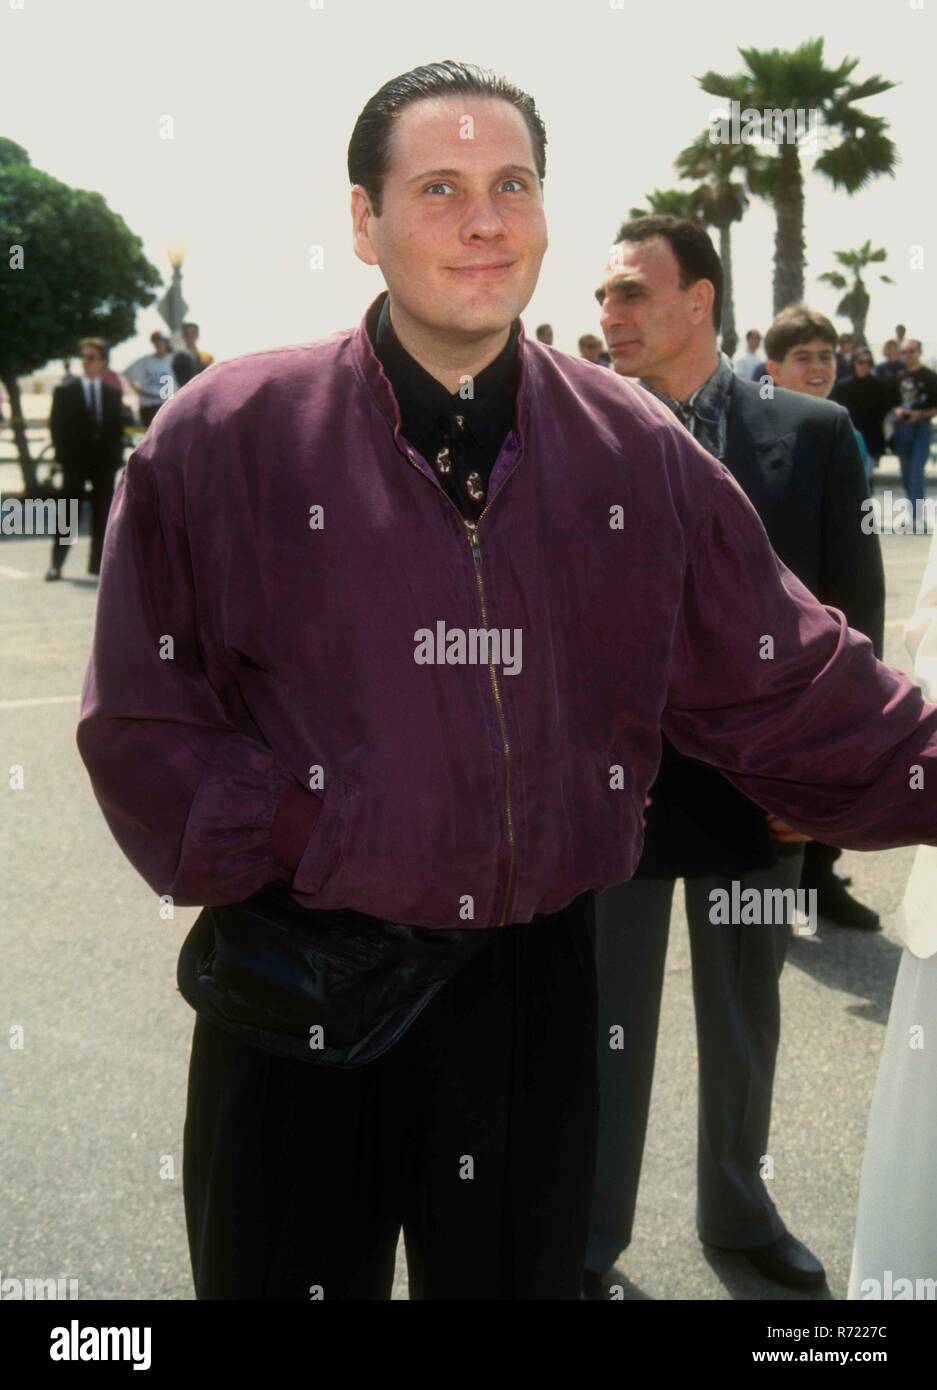 SANTA MONICA, CA - MARCH 27: Actor William Forsythe attends the Eighth Annual IFP/West Independent Spirit Awards on March 27, 1993 at the Santa Monica Beach in Santa Monica, California. Photo by Barry King/Alamy Stock Photo Stock Photo